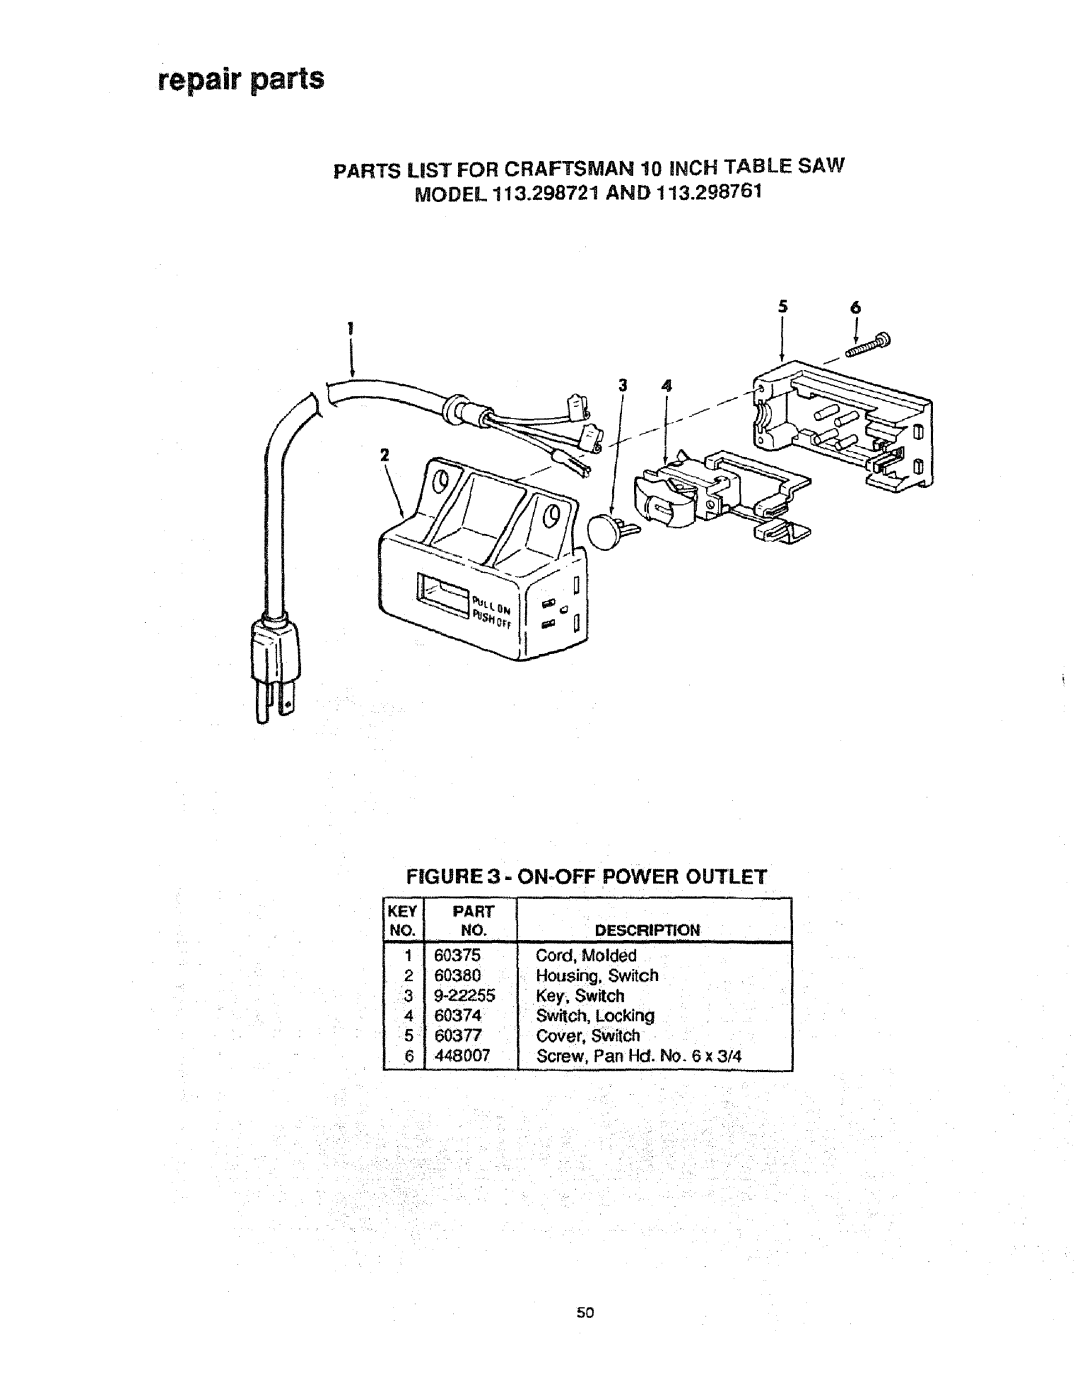 Craftsman manual PARTS LiST FOR CRAFTSMAN 10 INCH TABLE SAW MODEL 113.298721 AND, On-Off Power Outlet, repair parts 